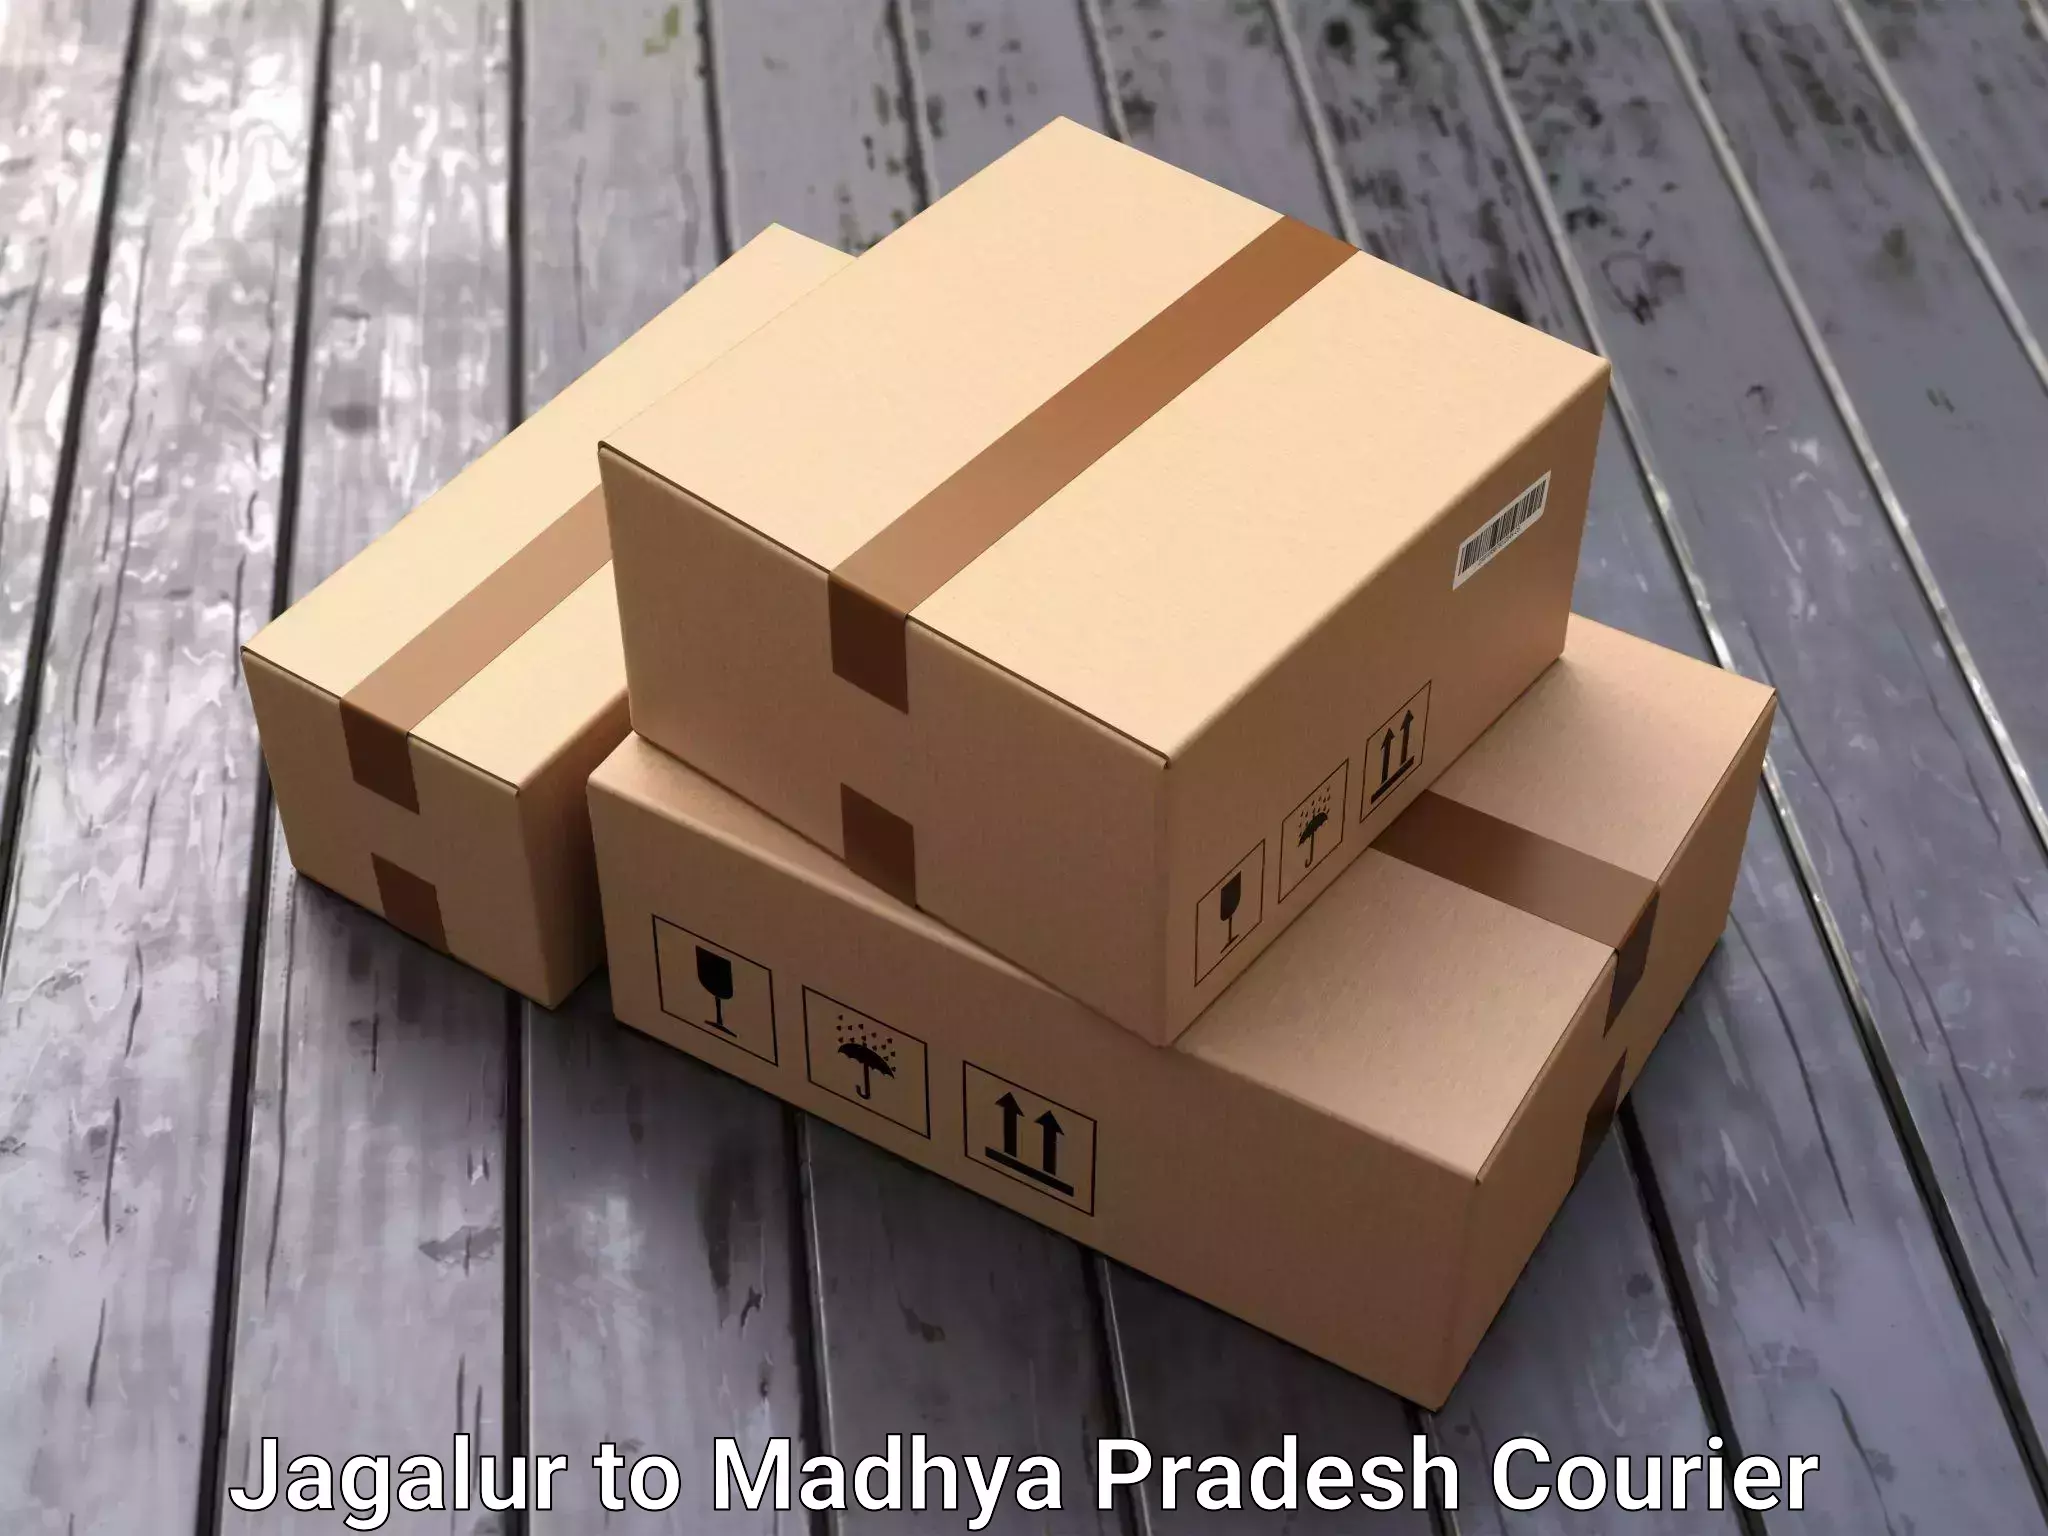 Professional moving company Jagalur to Chand Chaurai